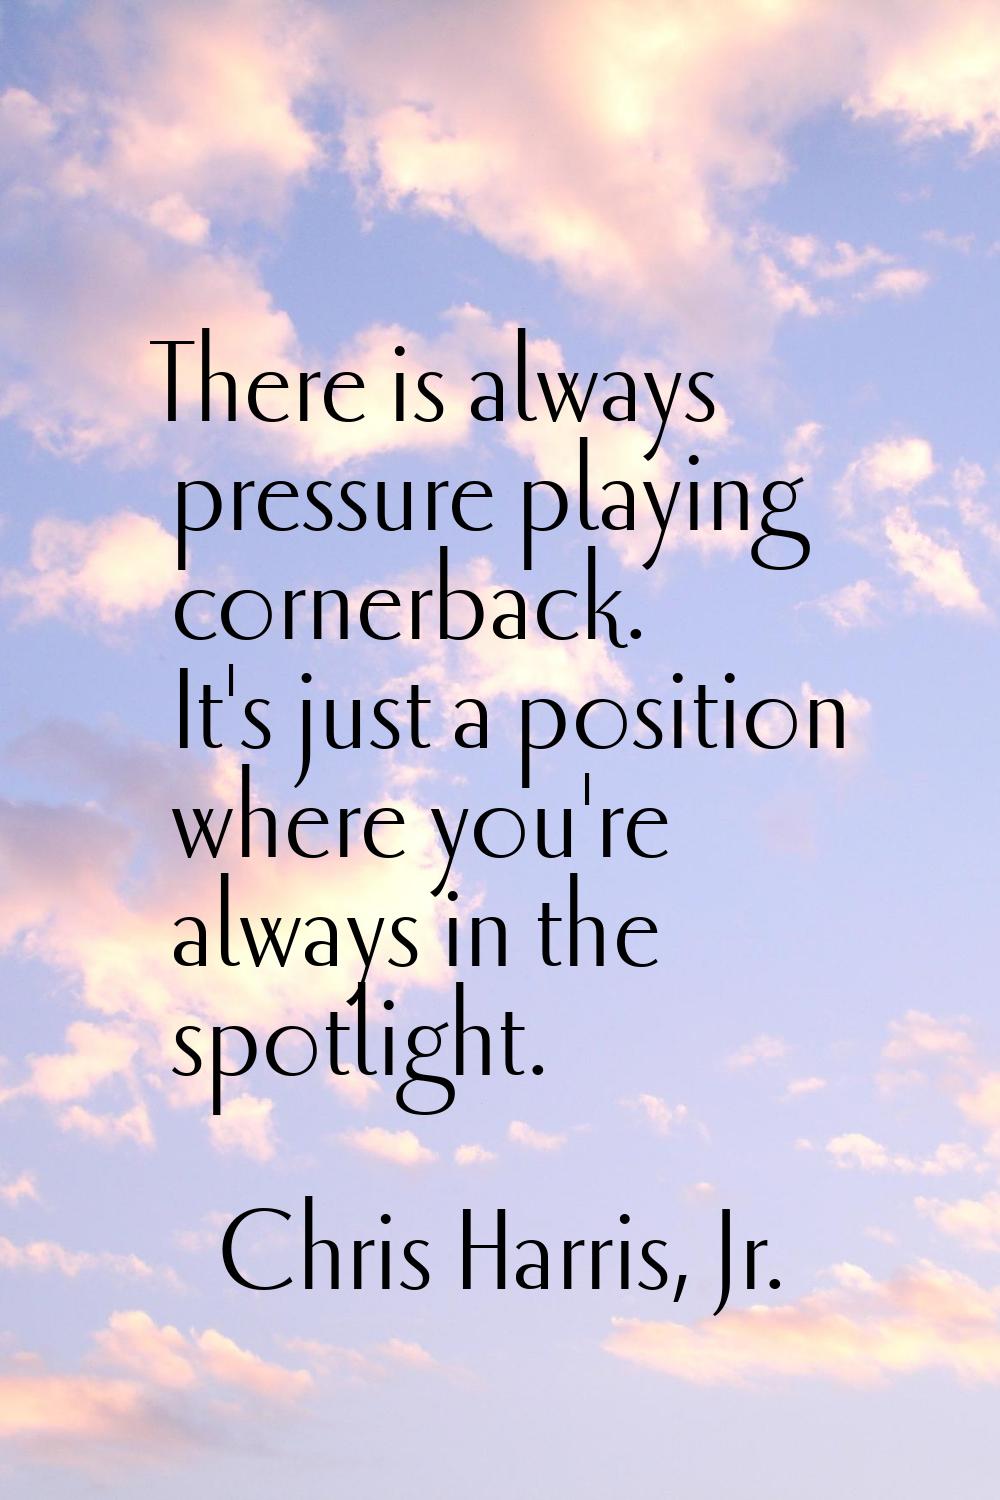 There is always pressure playing cornerback. It's just a position where you're always in the spotli